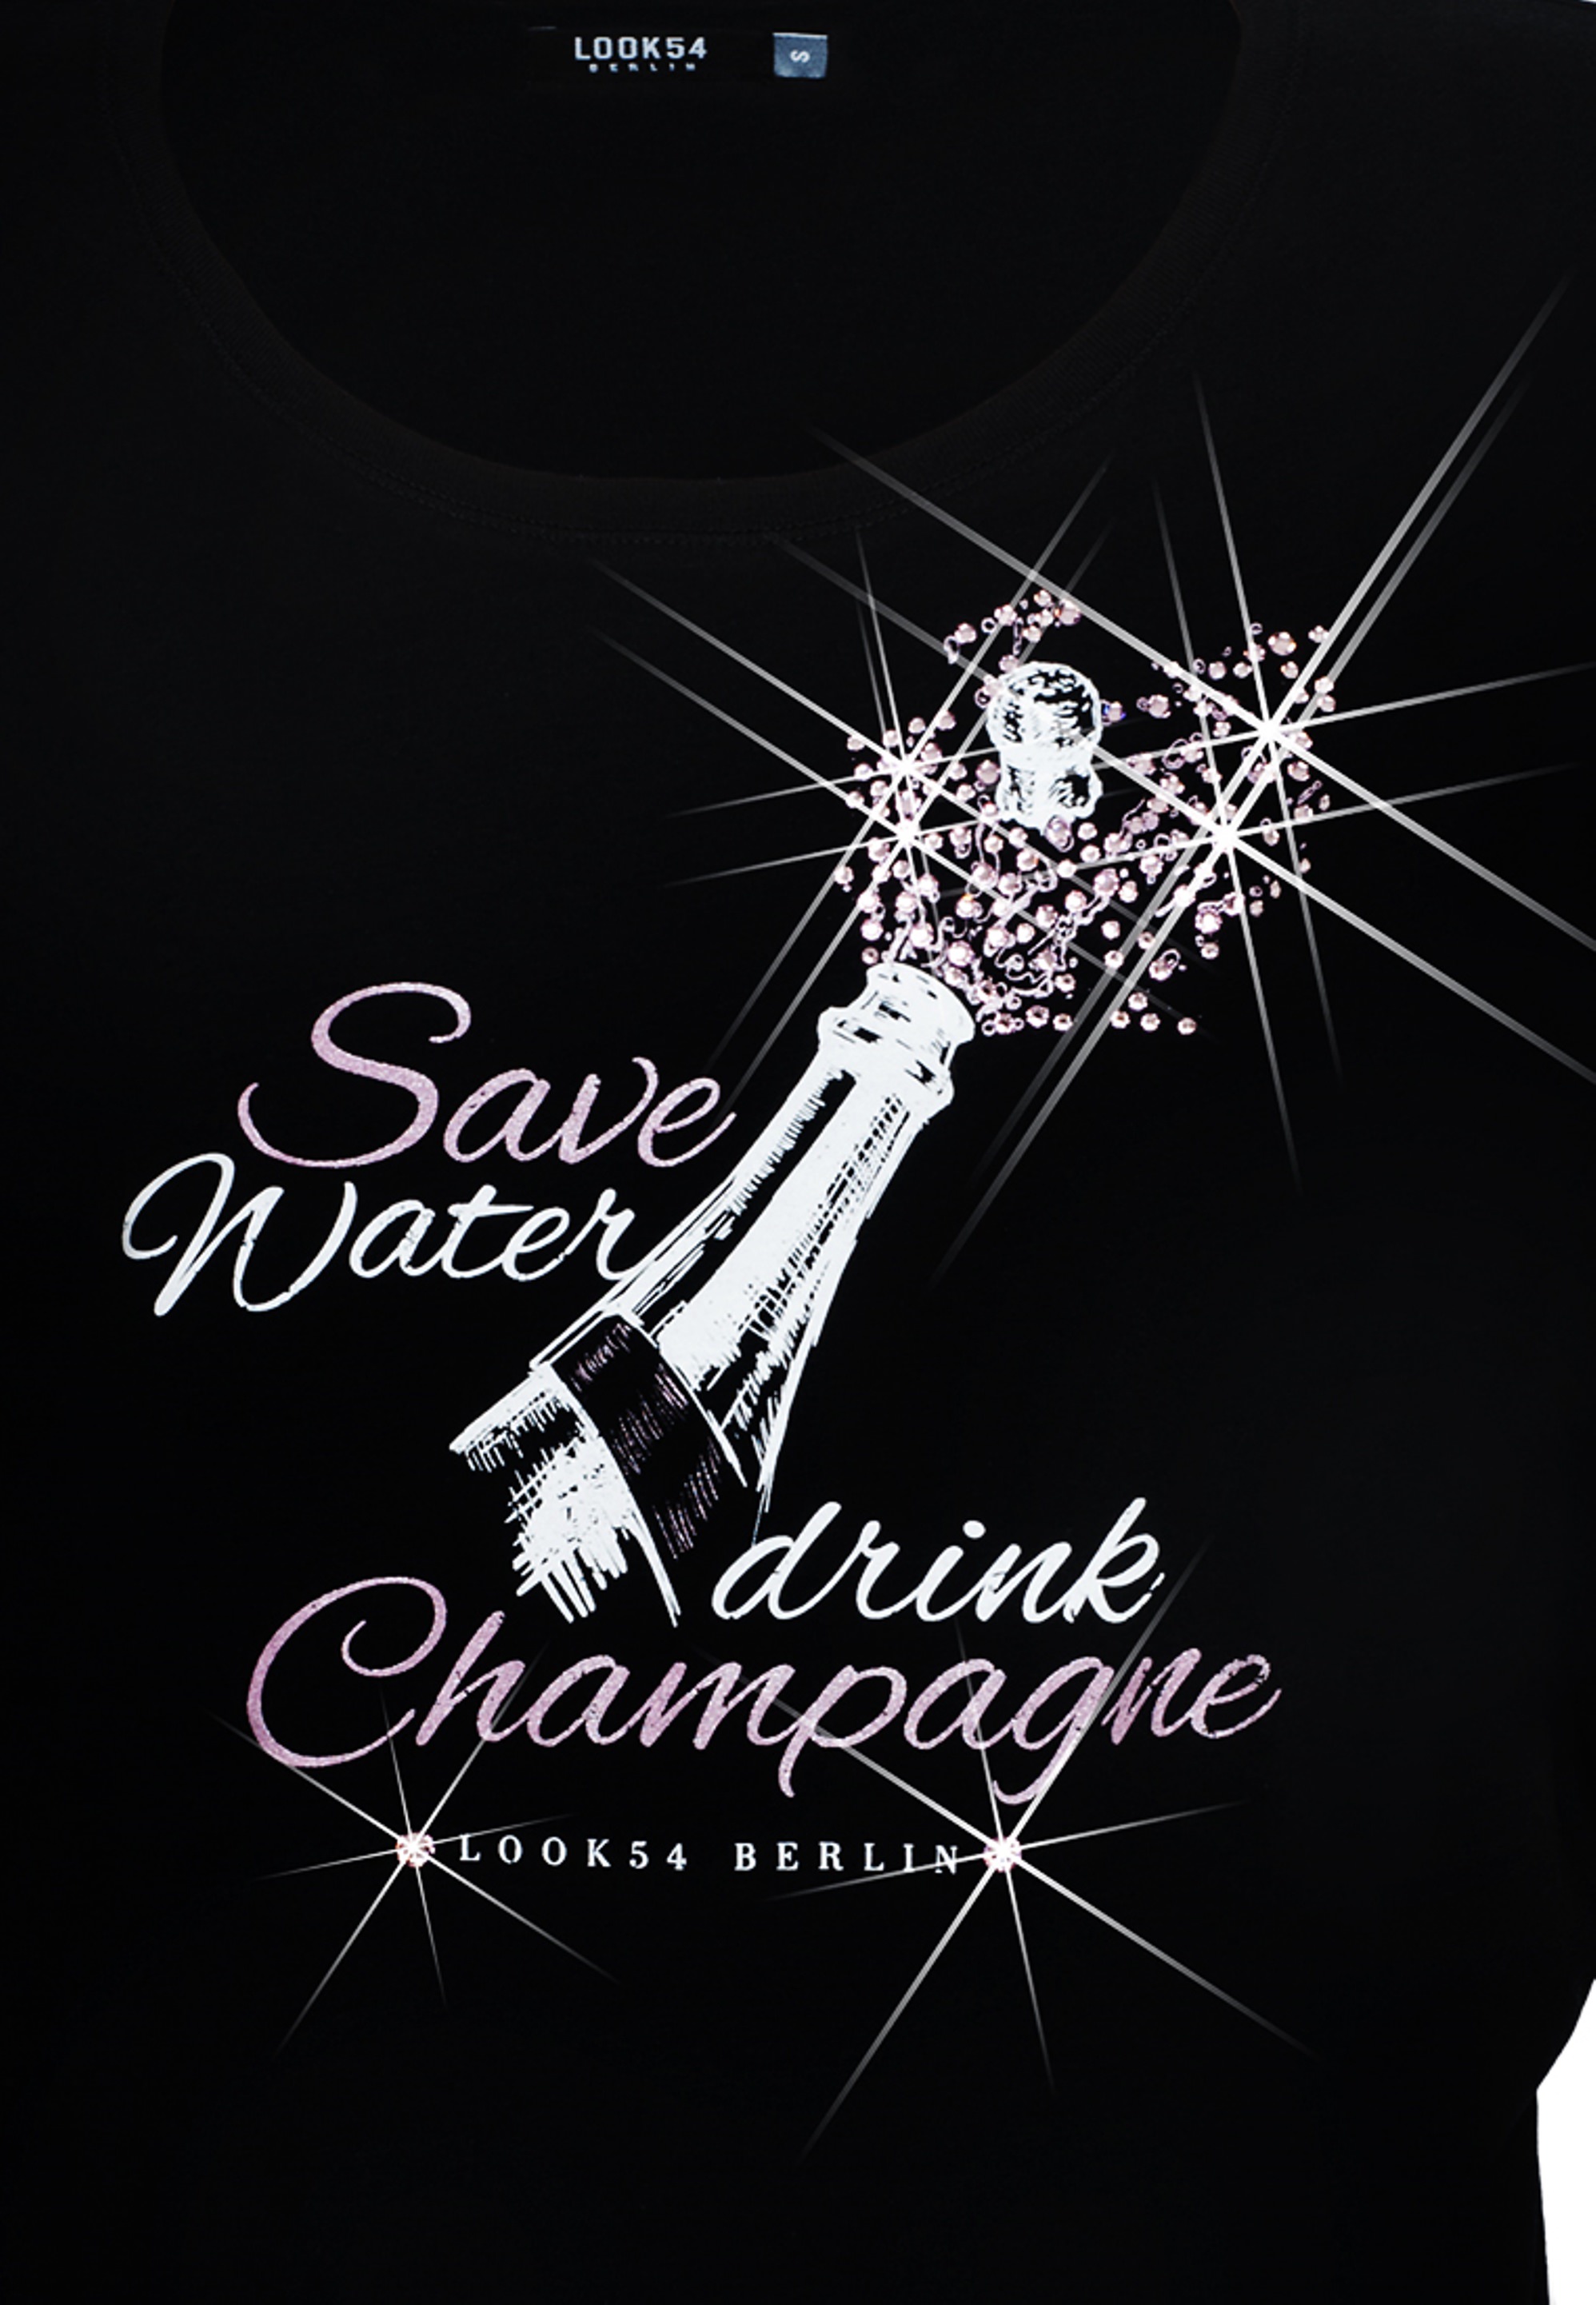 Save Water, Drink Champagne - Batwing Shirt